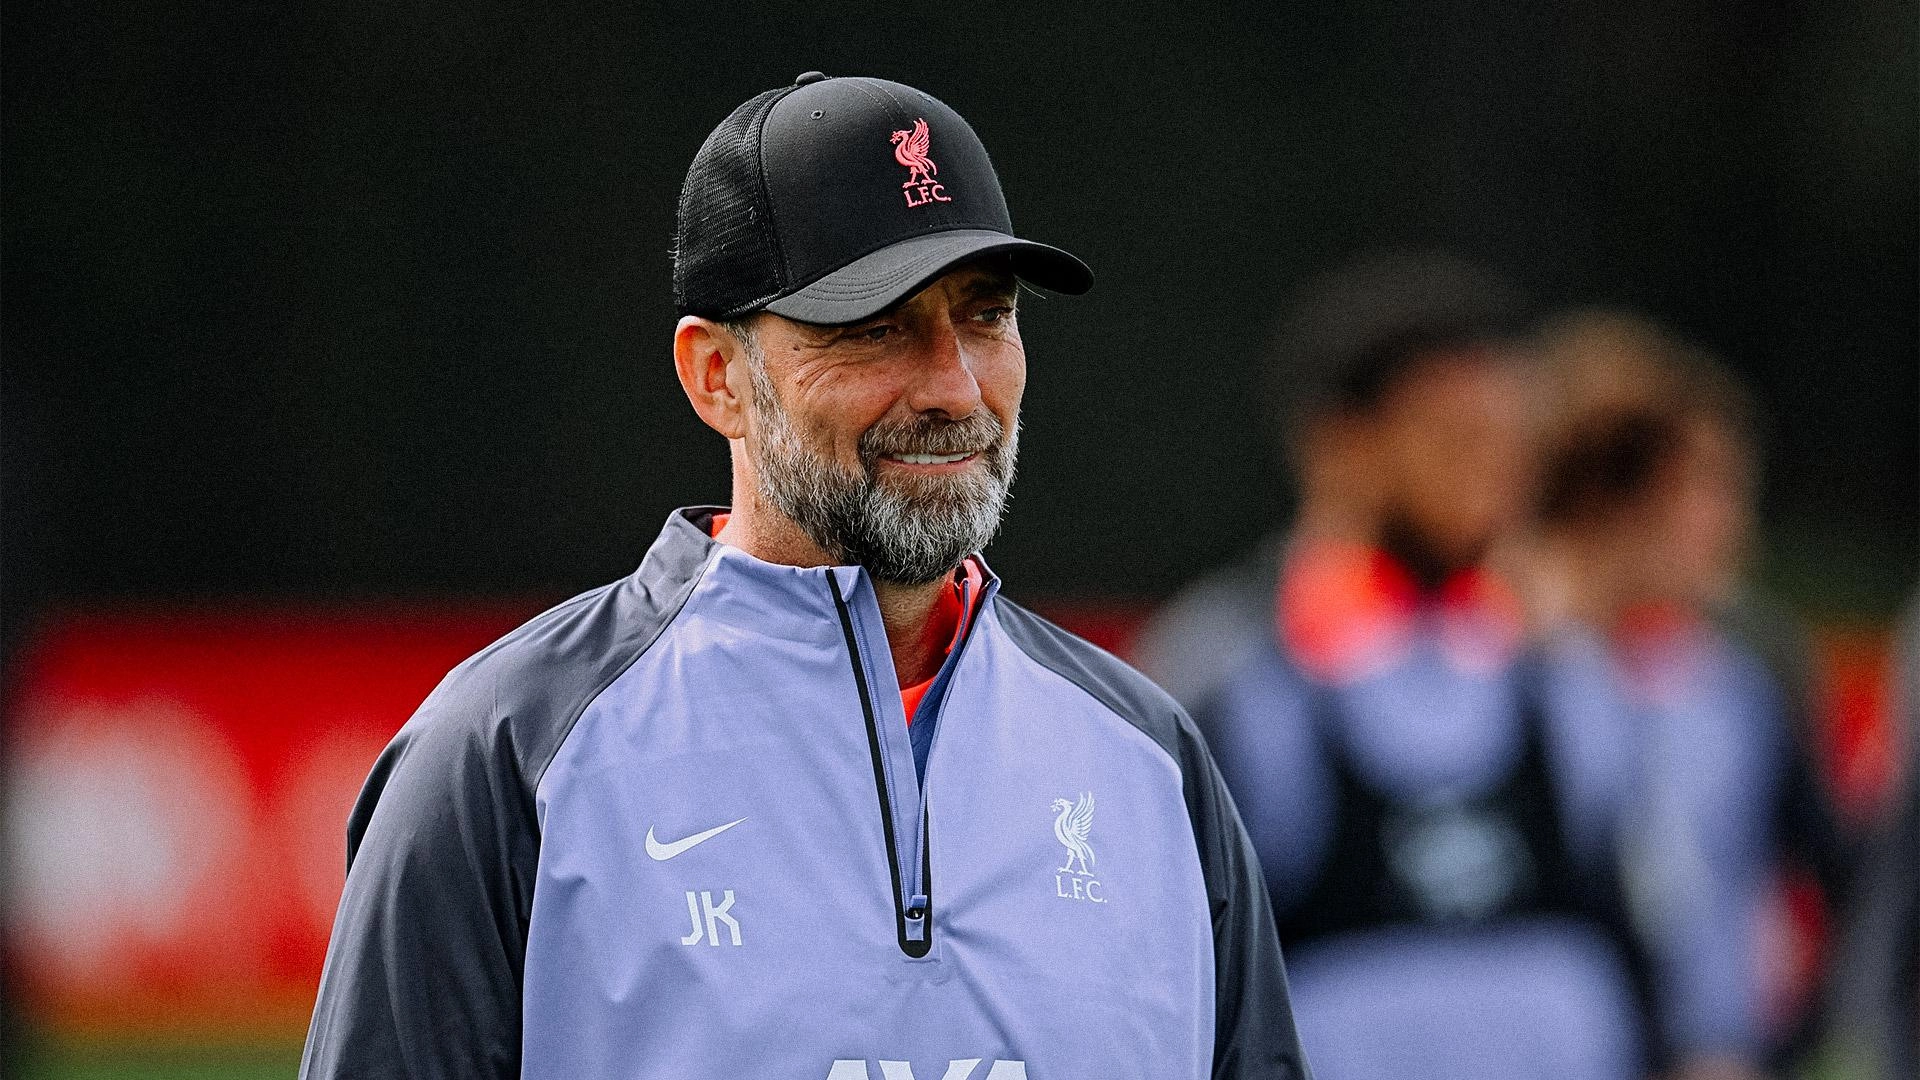 Pre-LASK stats: Jürgen Klopp targeting record 50th win in Europe as Reds  boss - Liverpool FC